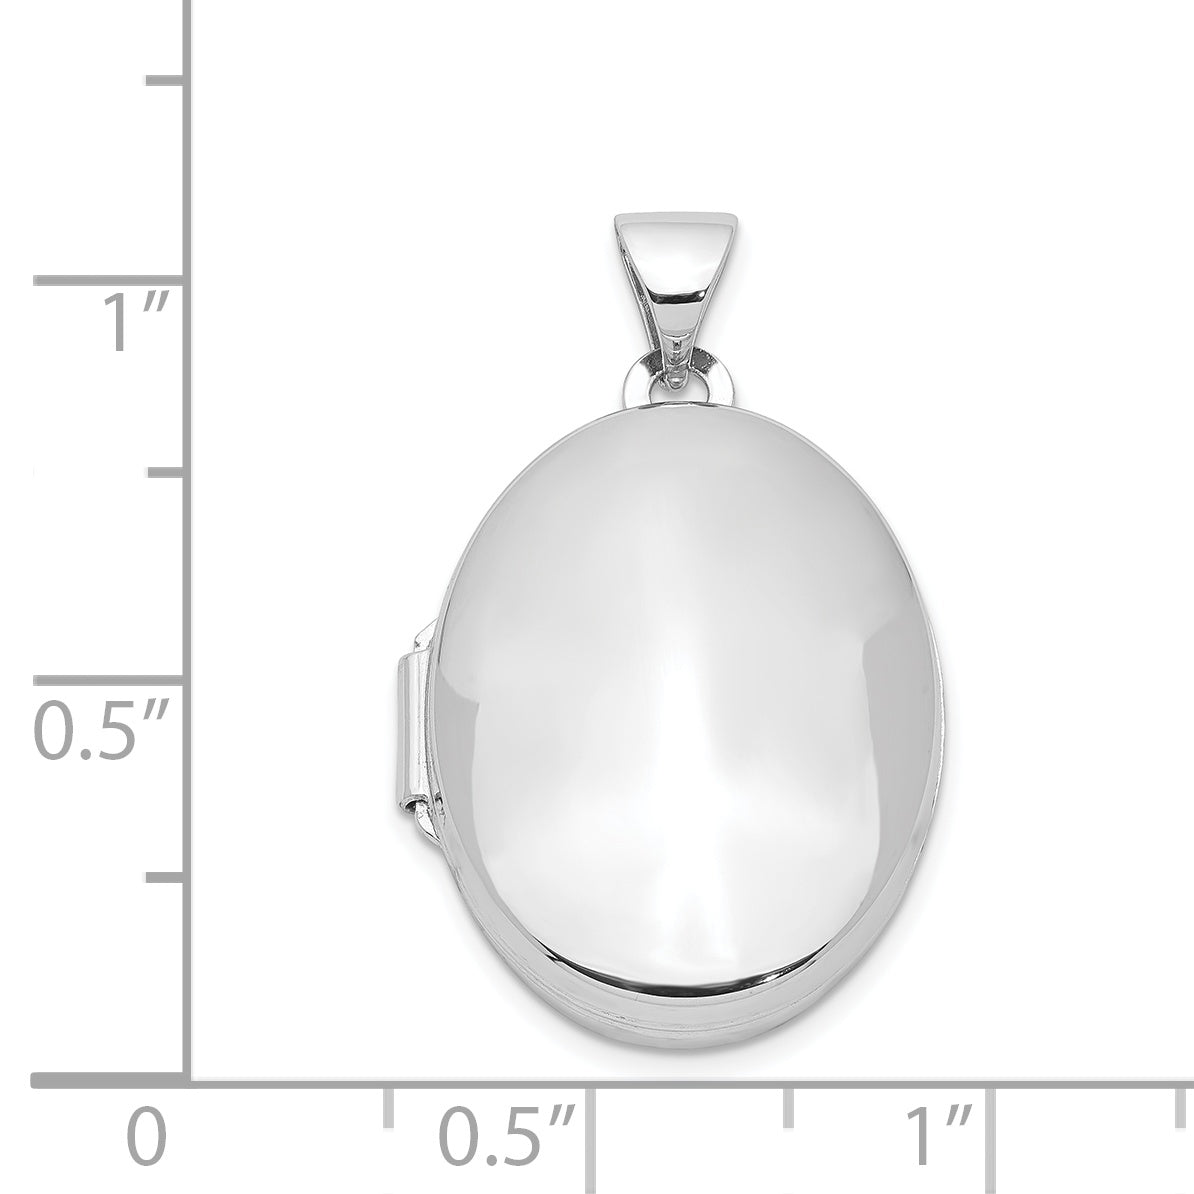 Sterling Silver Rhodium-plated Polished 21mm Oval Locket